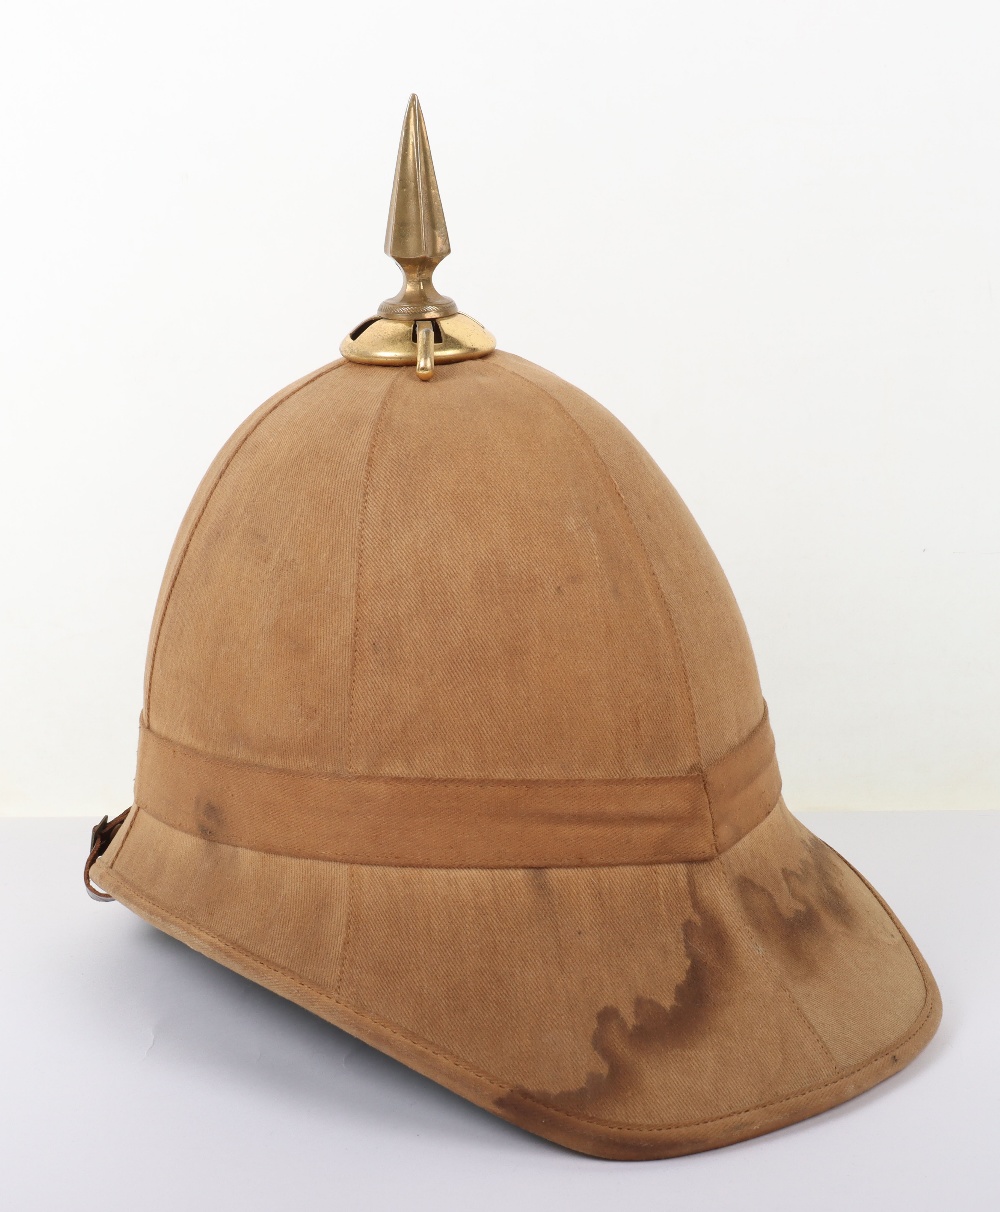 American Military Foreign Service Helmet c1900 - Image 4 of 8